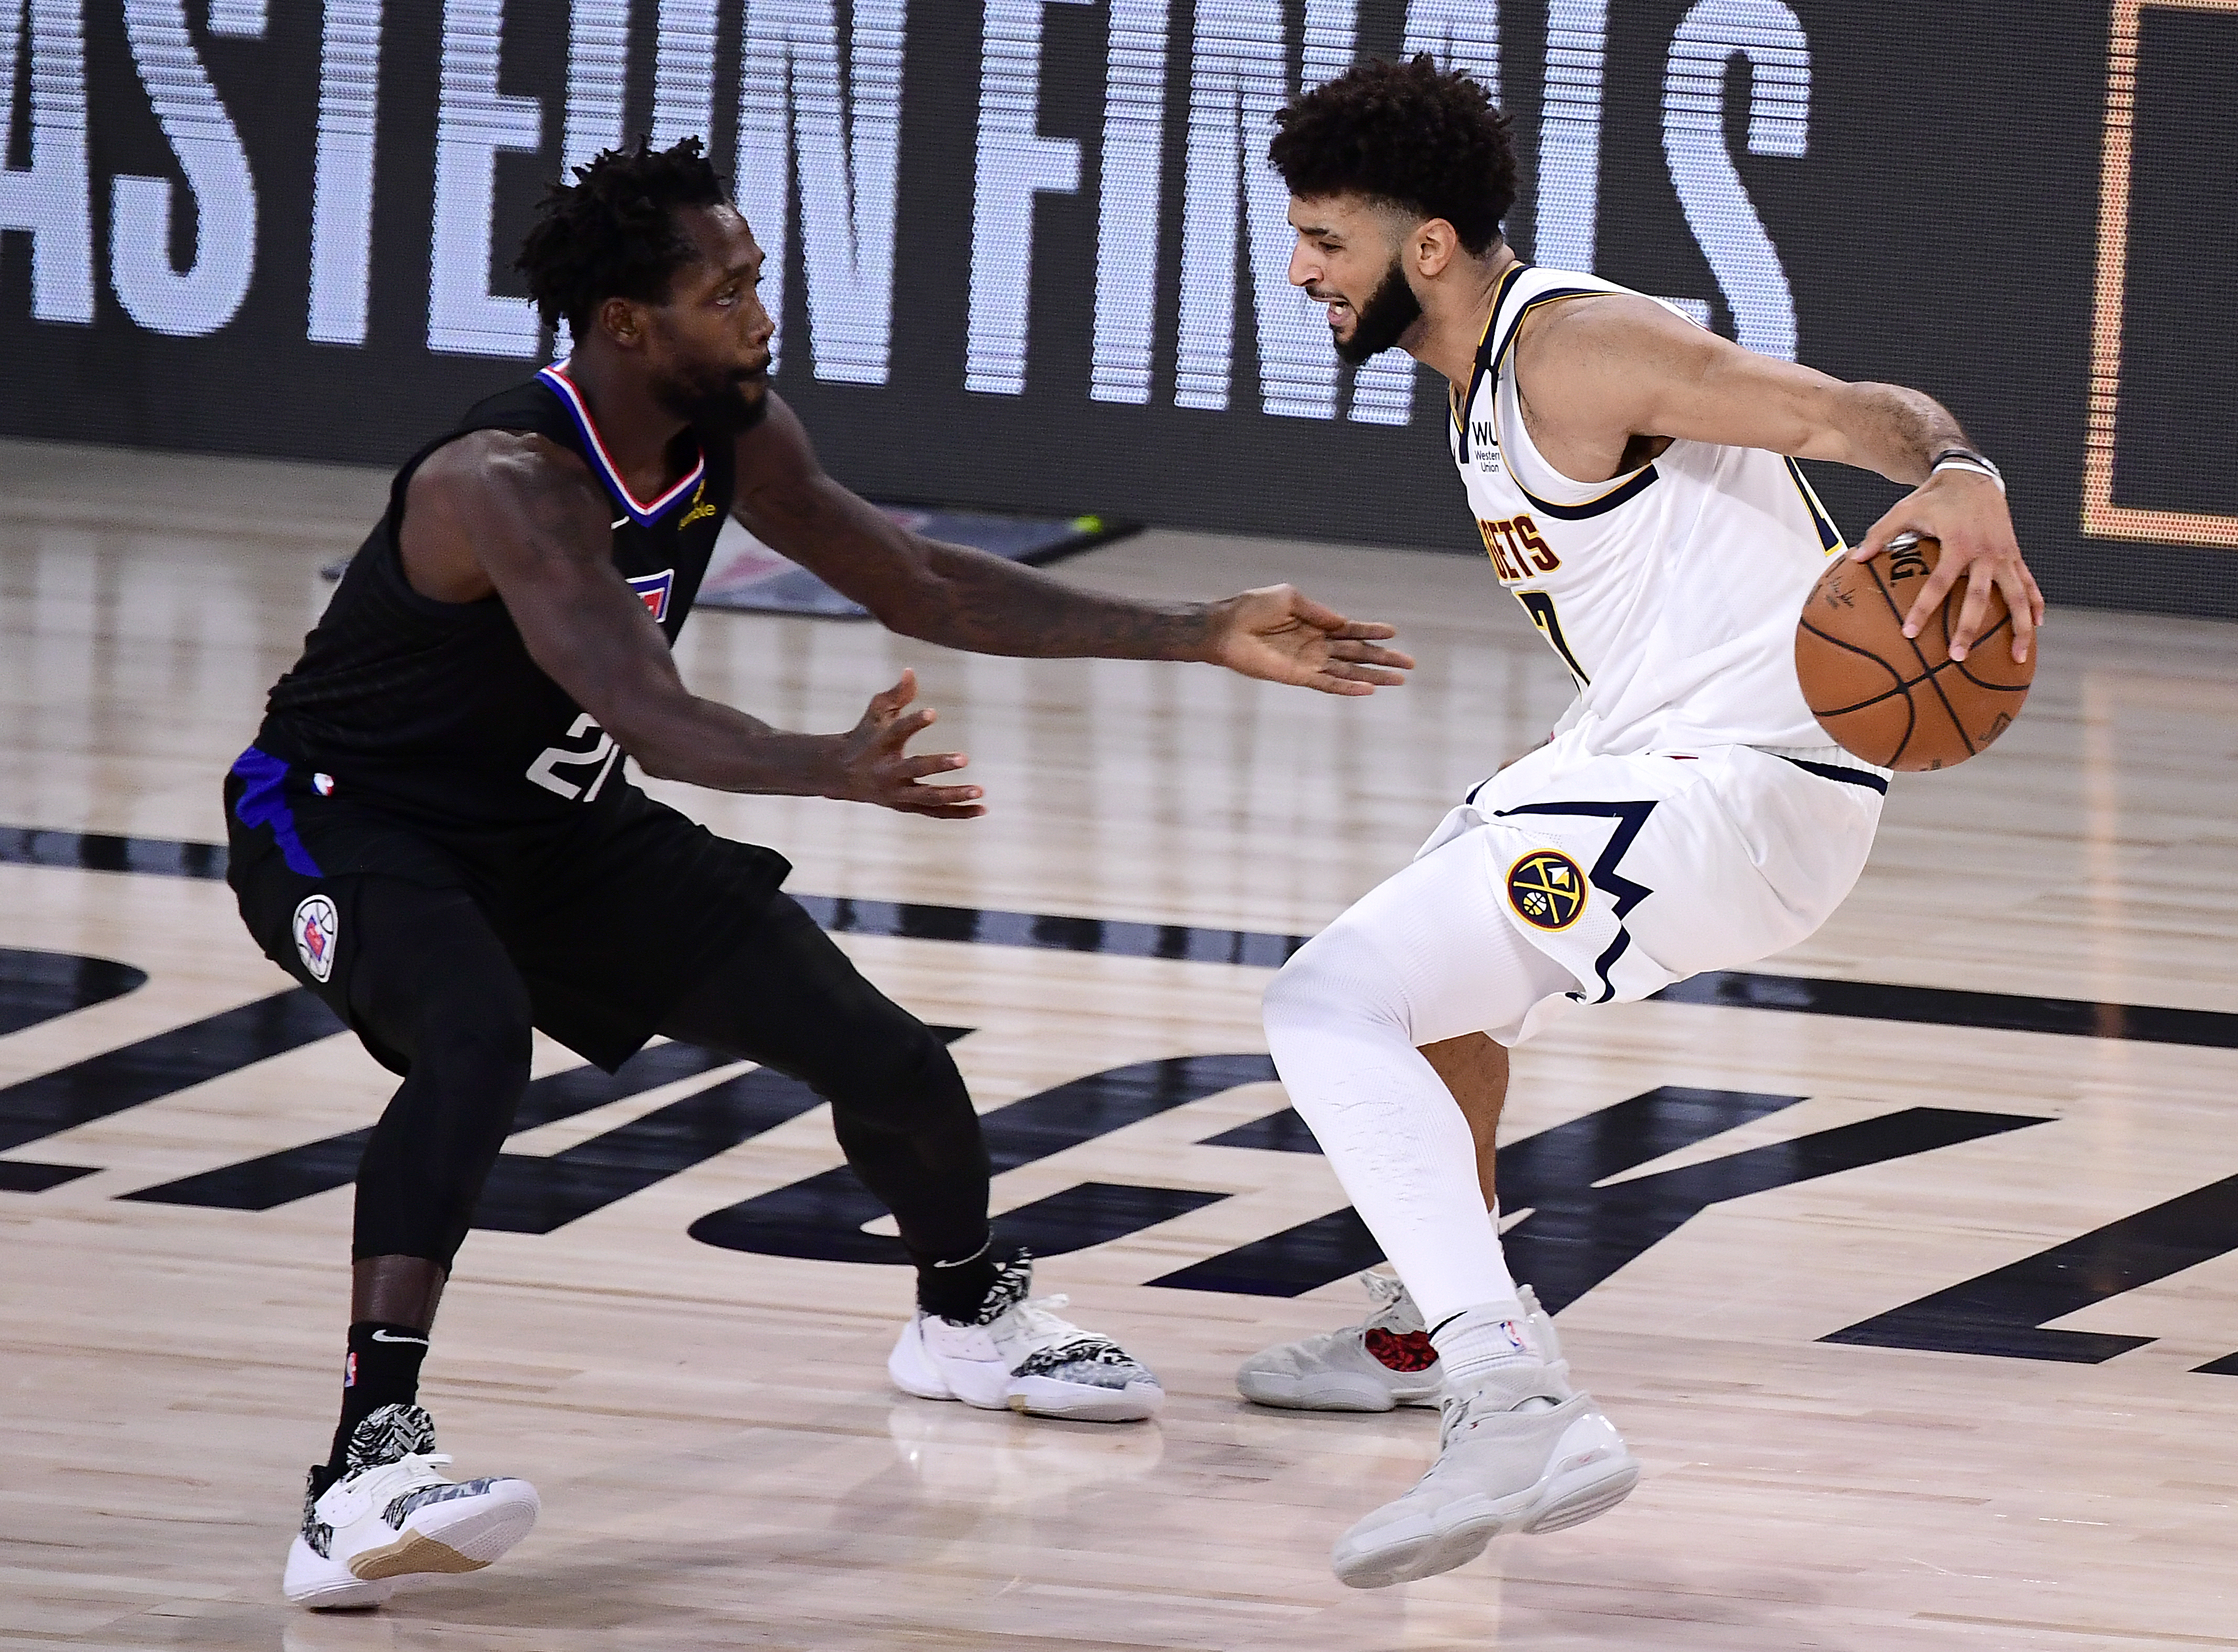 Jamal Murray of the Denver Nuggets drives the ball against Patrick Beverley of the LA Clippers in Game 7 of the Western Conference Second Round during the 2020 NBA Playoffs at AdventHealth Arena at the ESPN Wide World Of Sports Complex on Sept. 15, 2020.